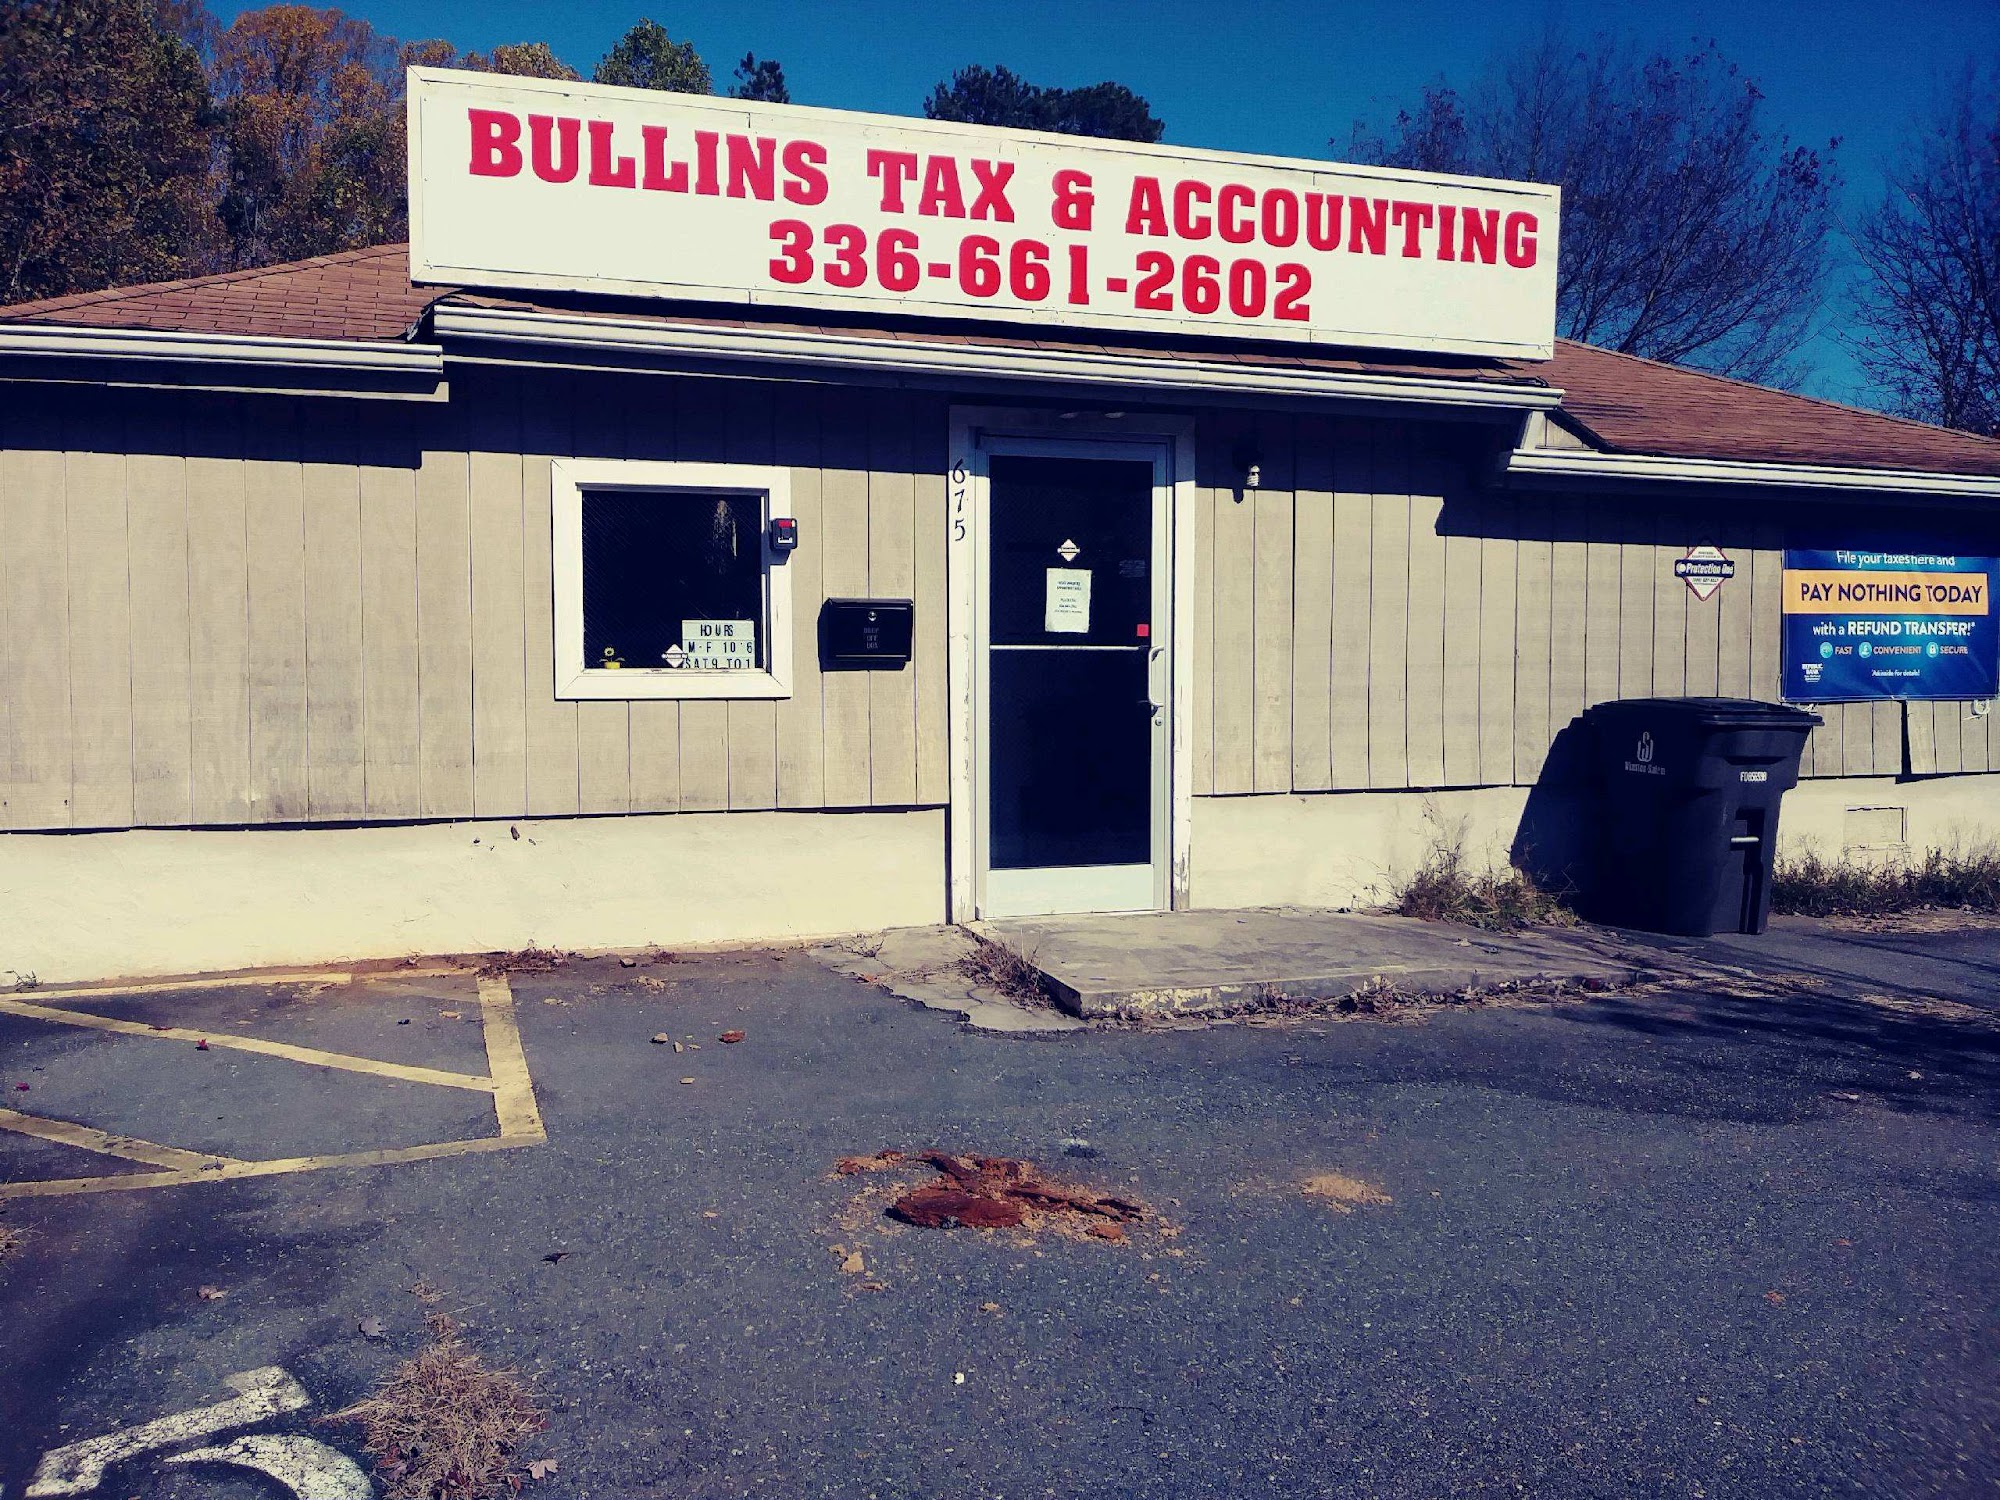 Bullins Tax & Accounting Services